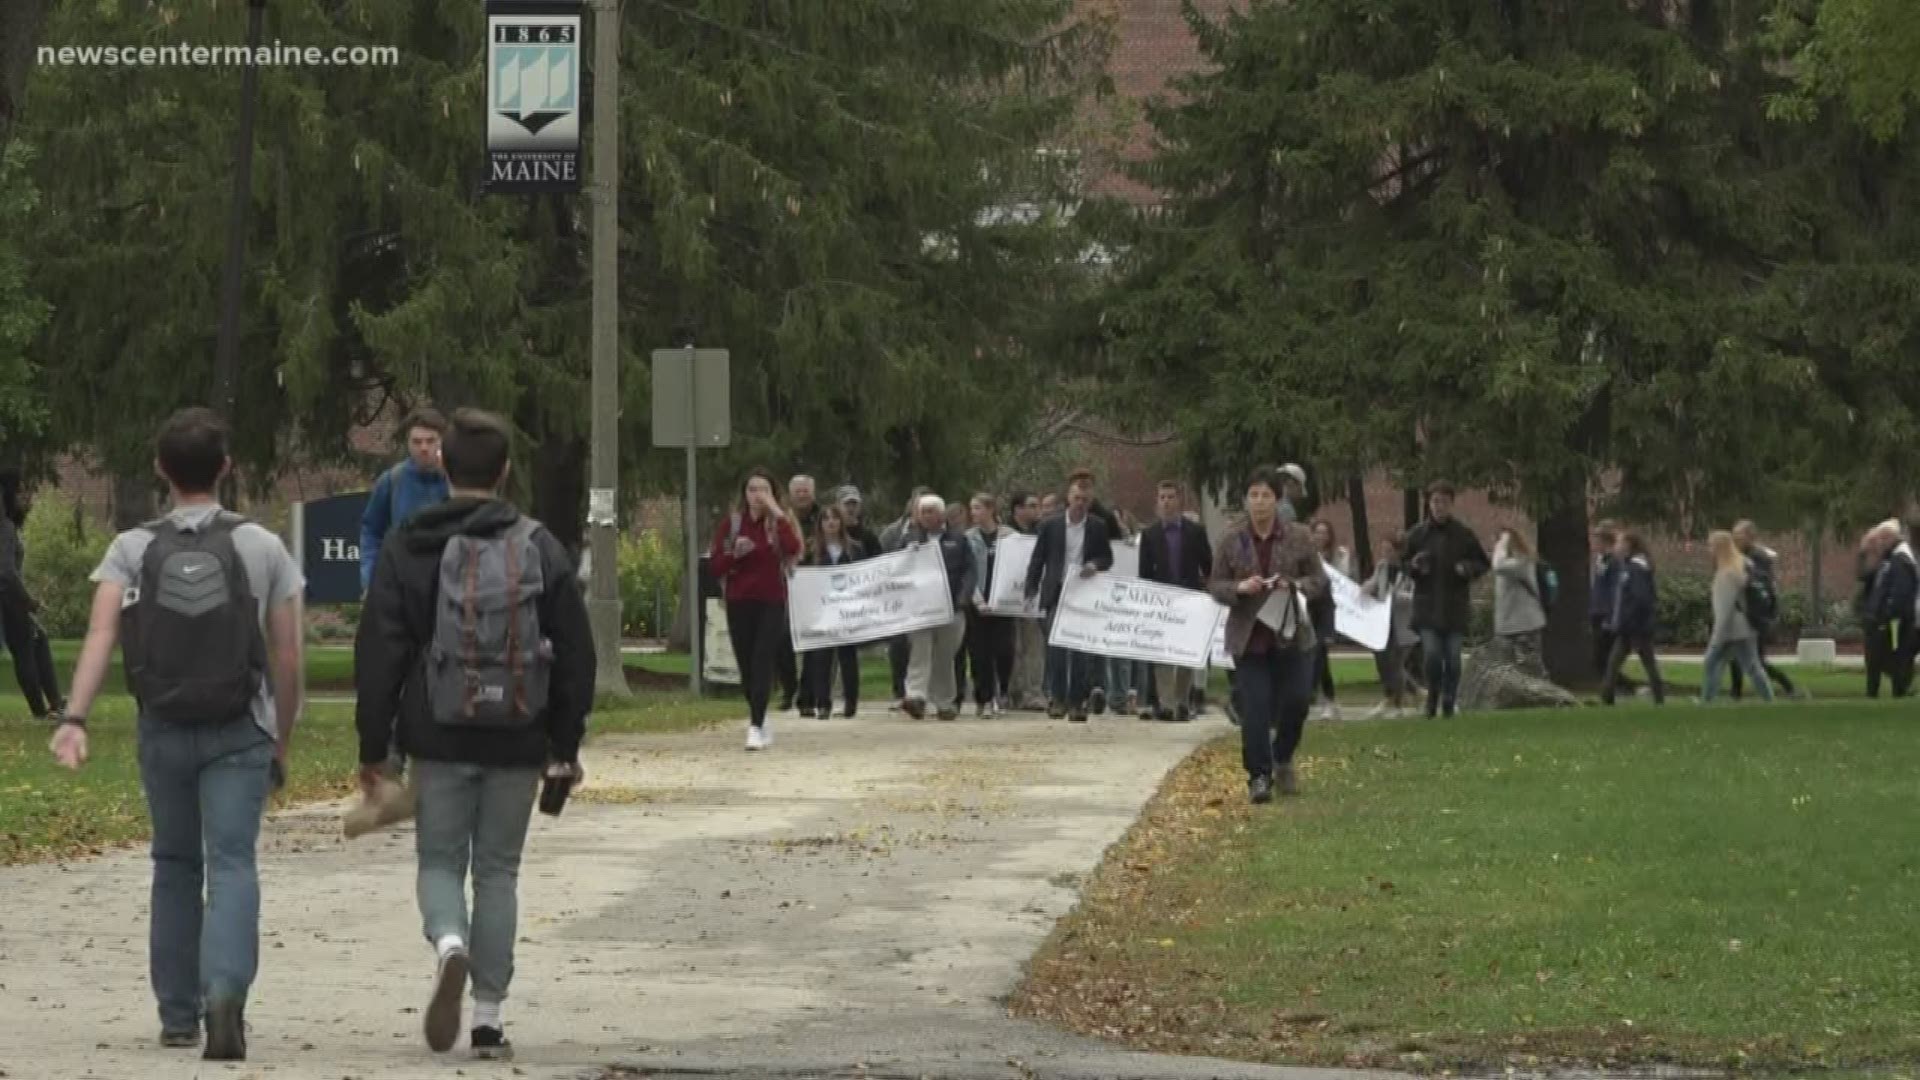 UMaine students and advocates met in front of Fogler Library Wednesday for a march and speeches raising awareness about domestic violence.